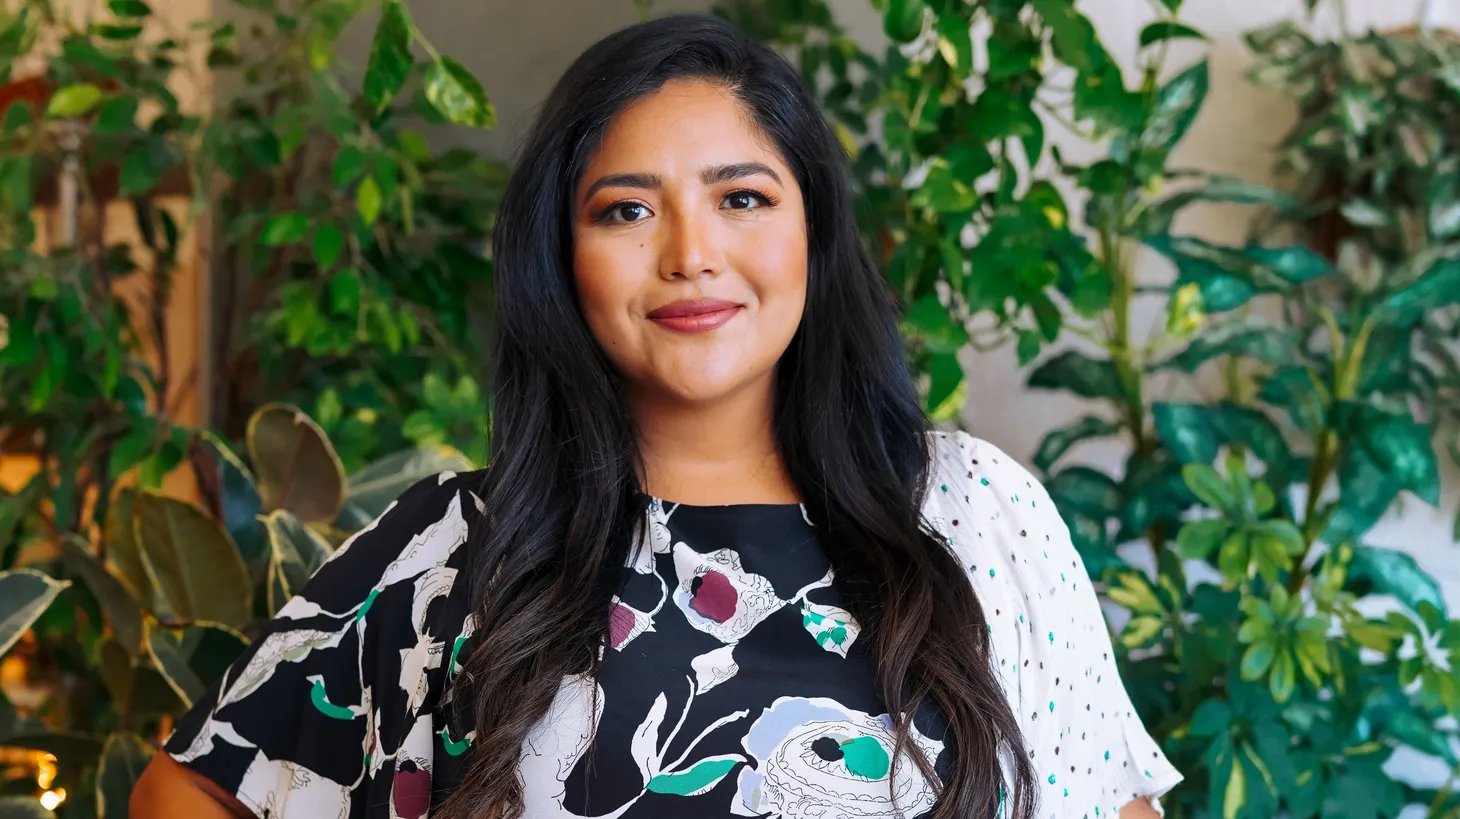 “Whiteness is something that is dangled in front of people of color, to say, ‘If you aspire to this, if you embody this, then you'll belong in the United States,’” says Julissa Arce, who was born in Mexico.